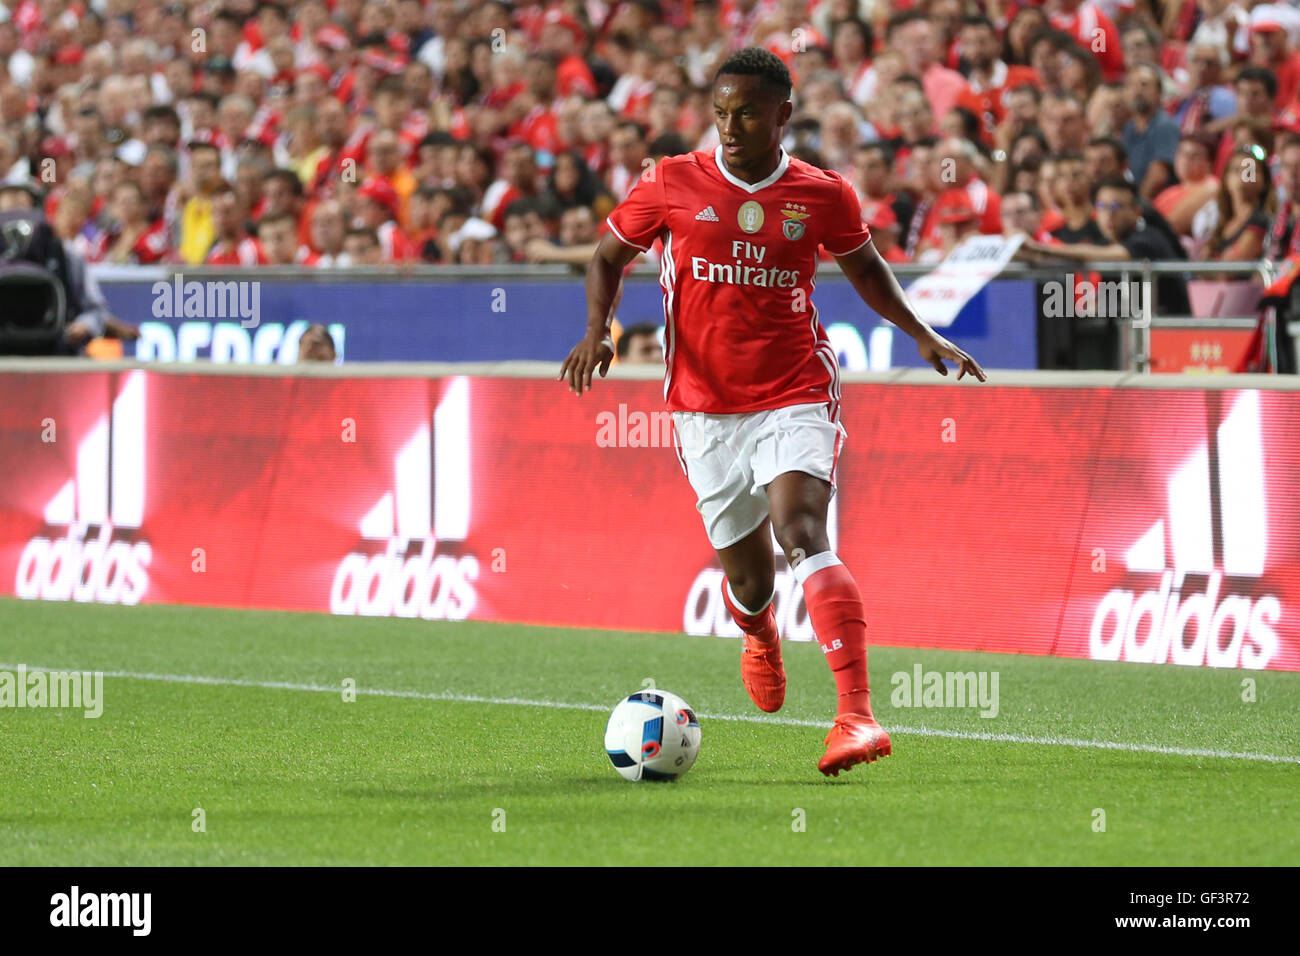 Lisbon, Portugal. 27th July, 2016. SL Benfica's forward from Peru Andre Carrillo Credit:  Alexandre Sousa/Alamy Live News Stock Photo